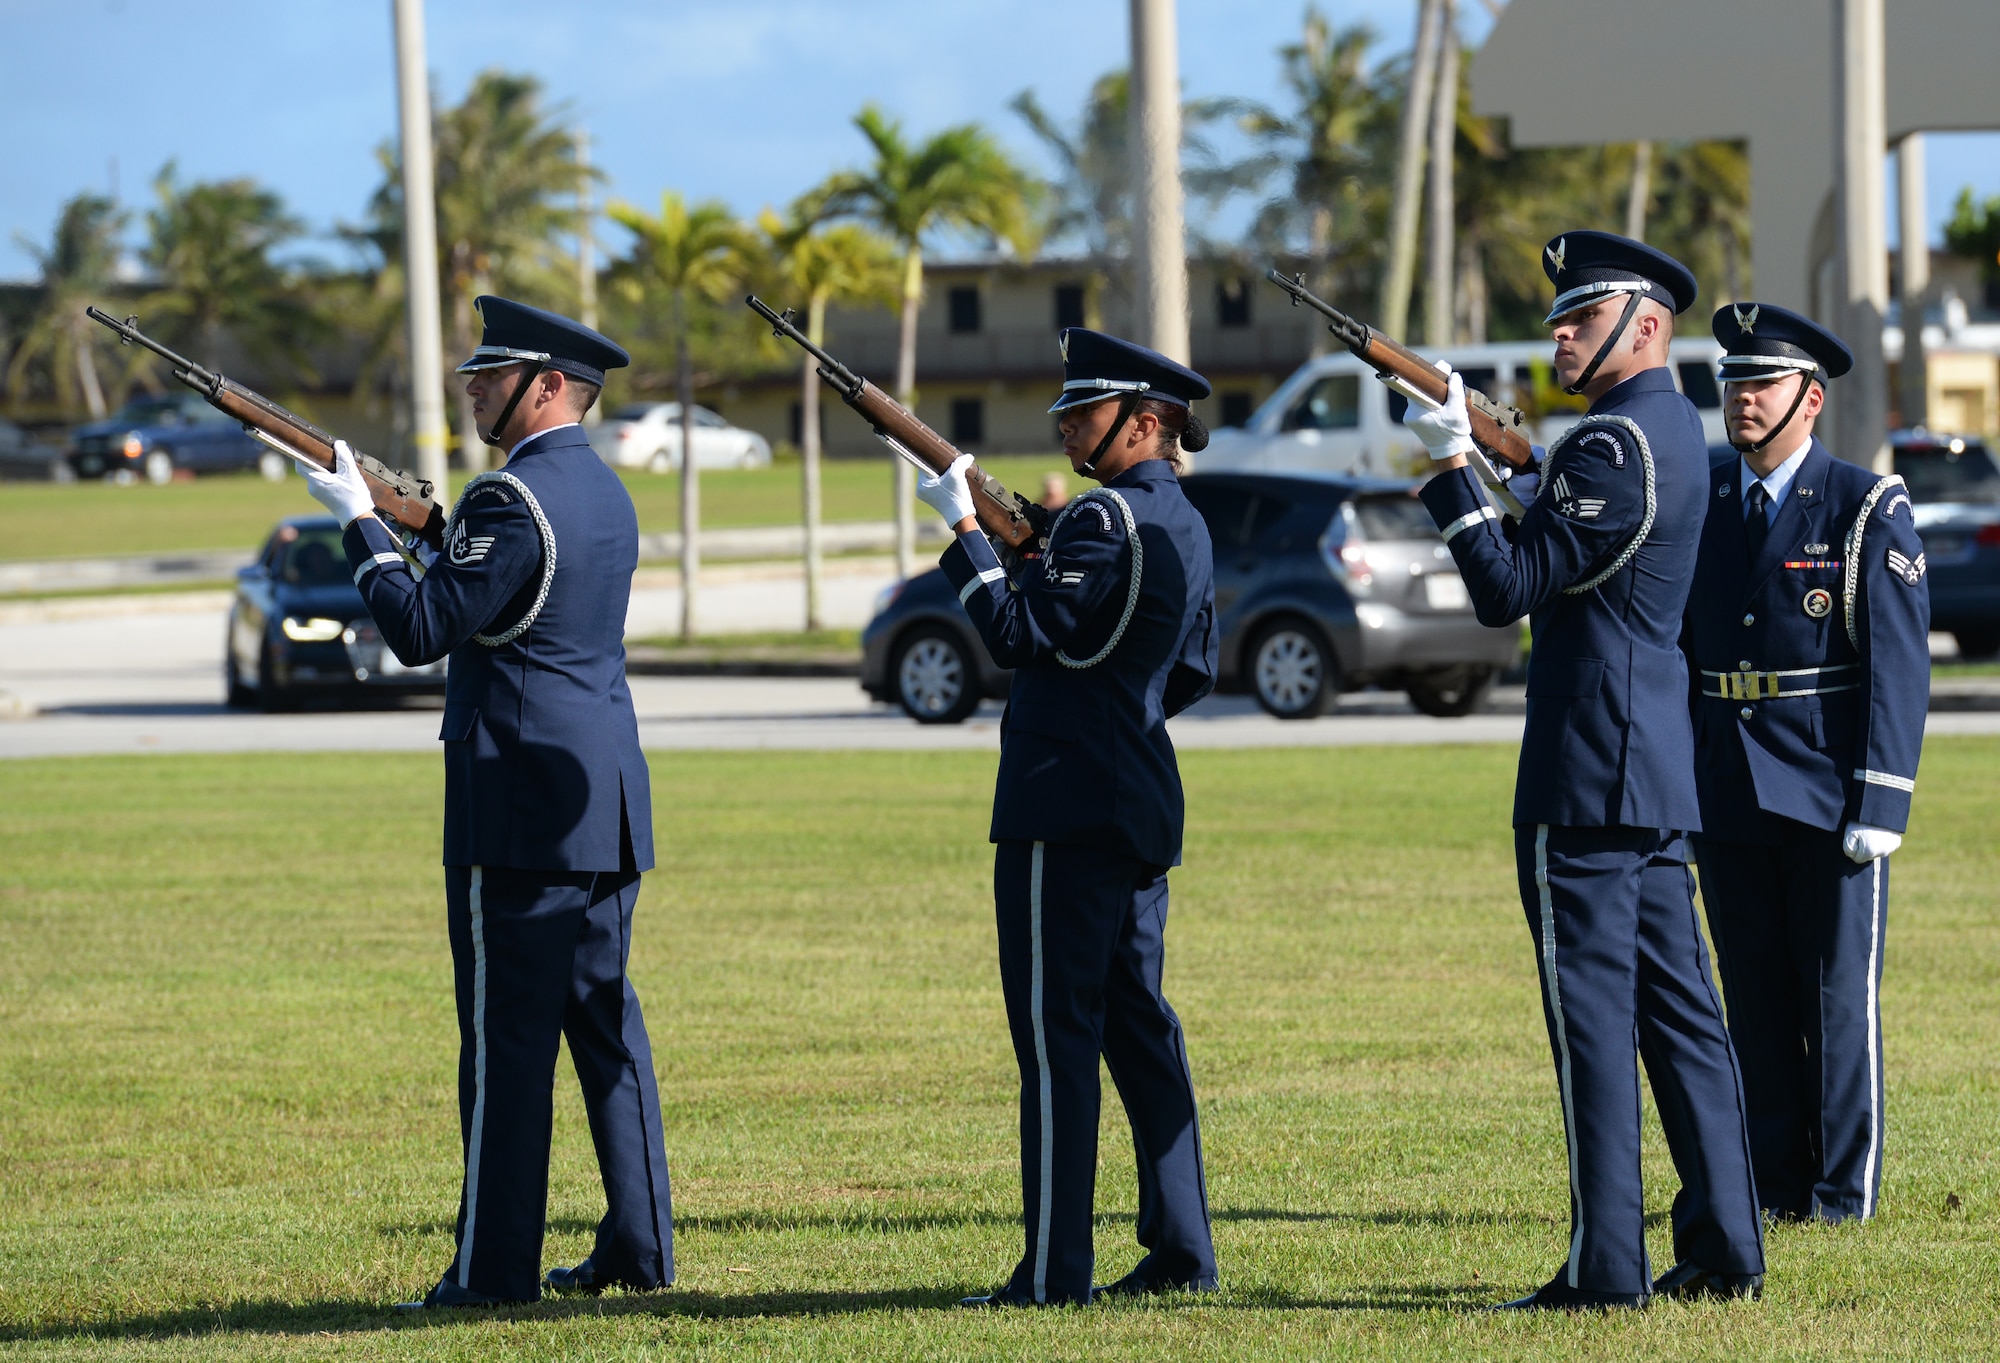 Andersen Blue Knights conduct a fire party sequence during the Linebacker II Remembrance Ceremony Dec. 18, 2015, at Andersen Air Force Base, Guam. After Operation Linebacker II, 15 B-52 Stratofortresses were lost and 33 Airmen were killed. (U.S. Air Force photo/Staff Sgt. Benjamin Gonsier)